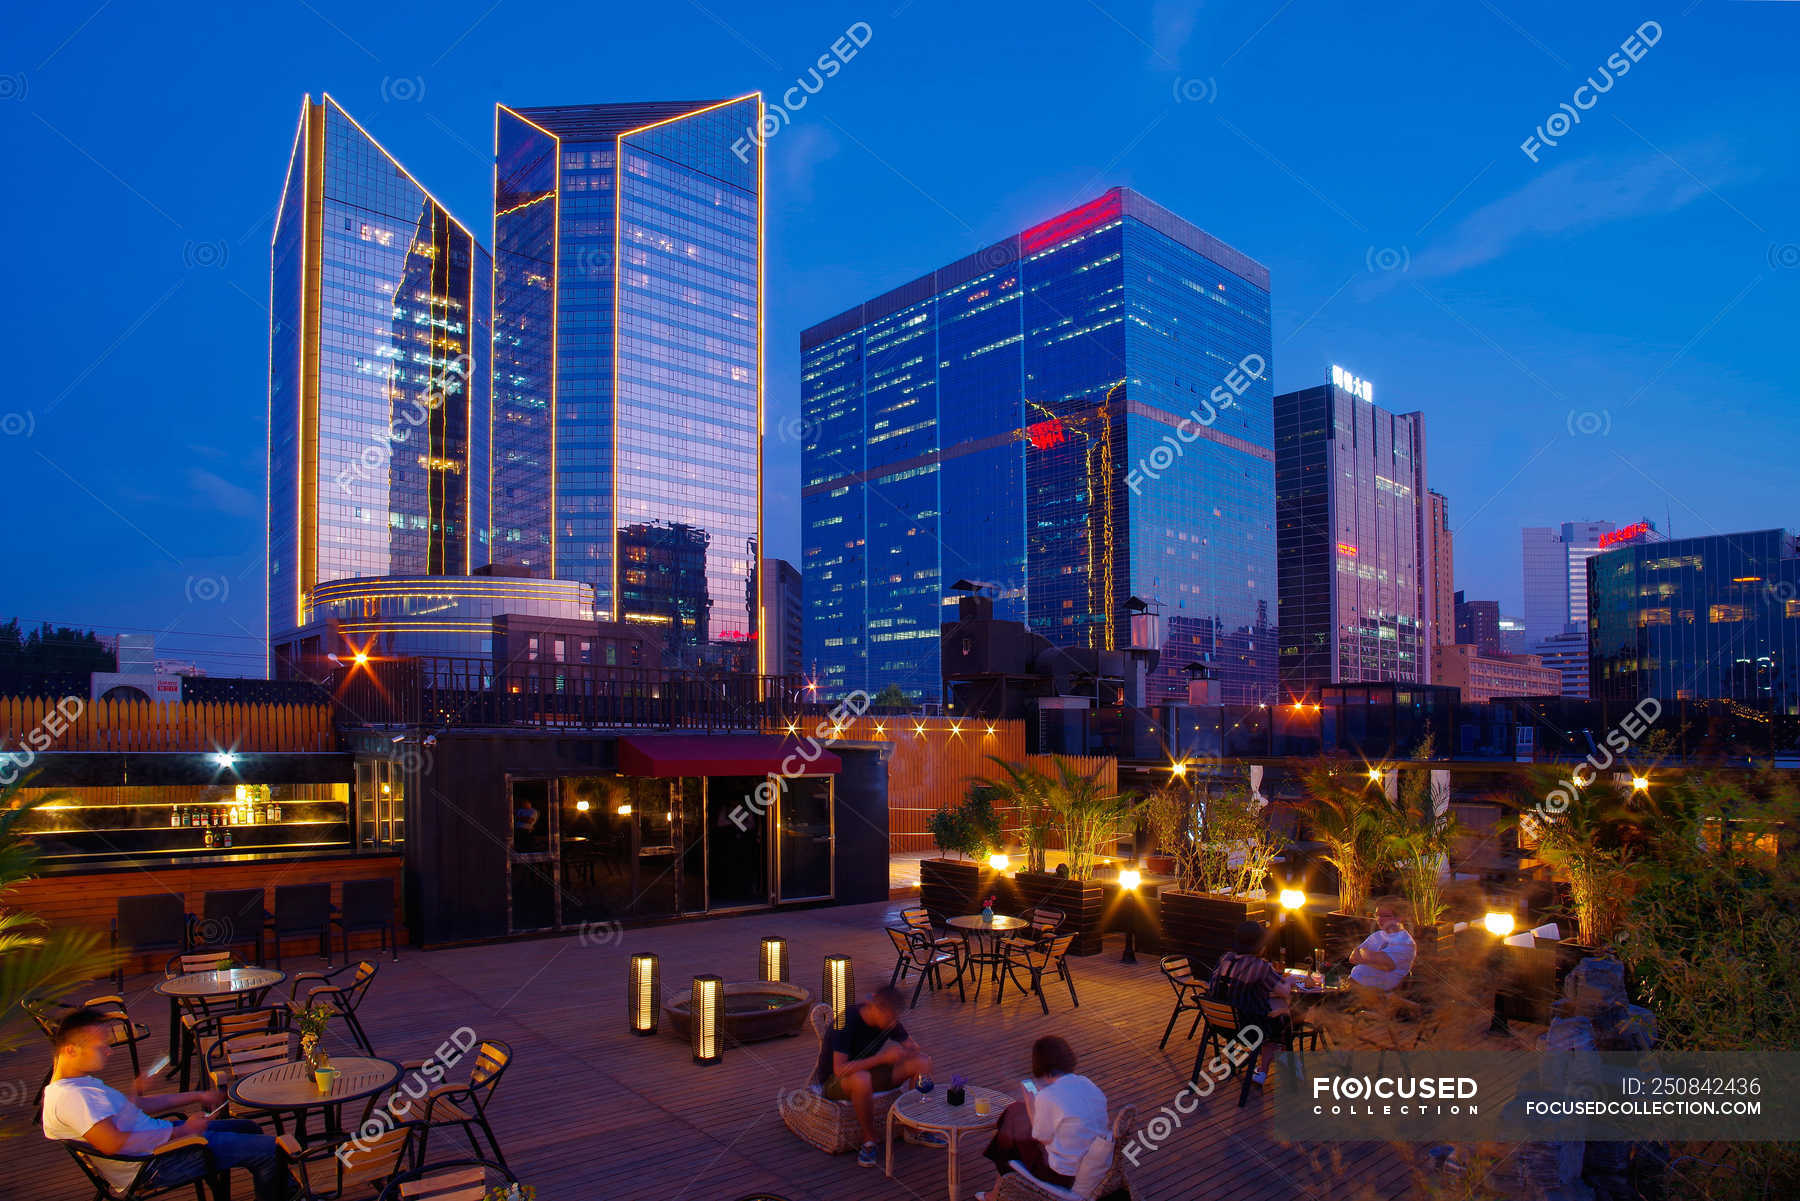 People Sitting On Chairs On Terrace And Beautiful Night City View Of Beijing China Cityscape Stock Photo